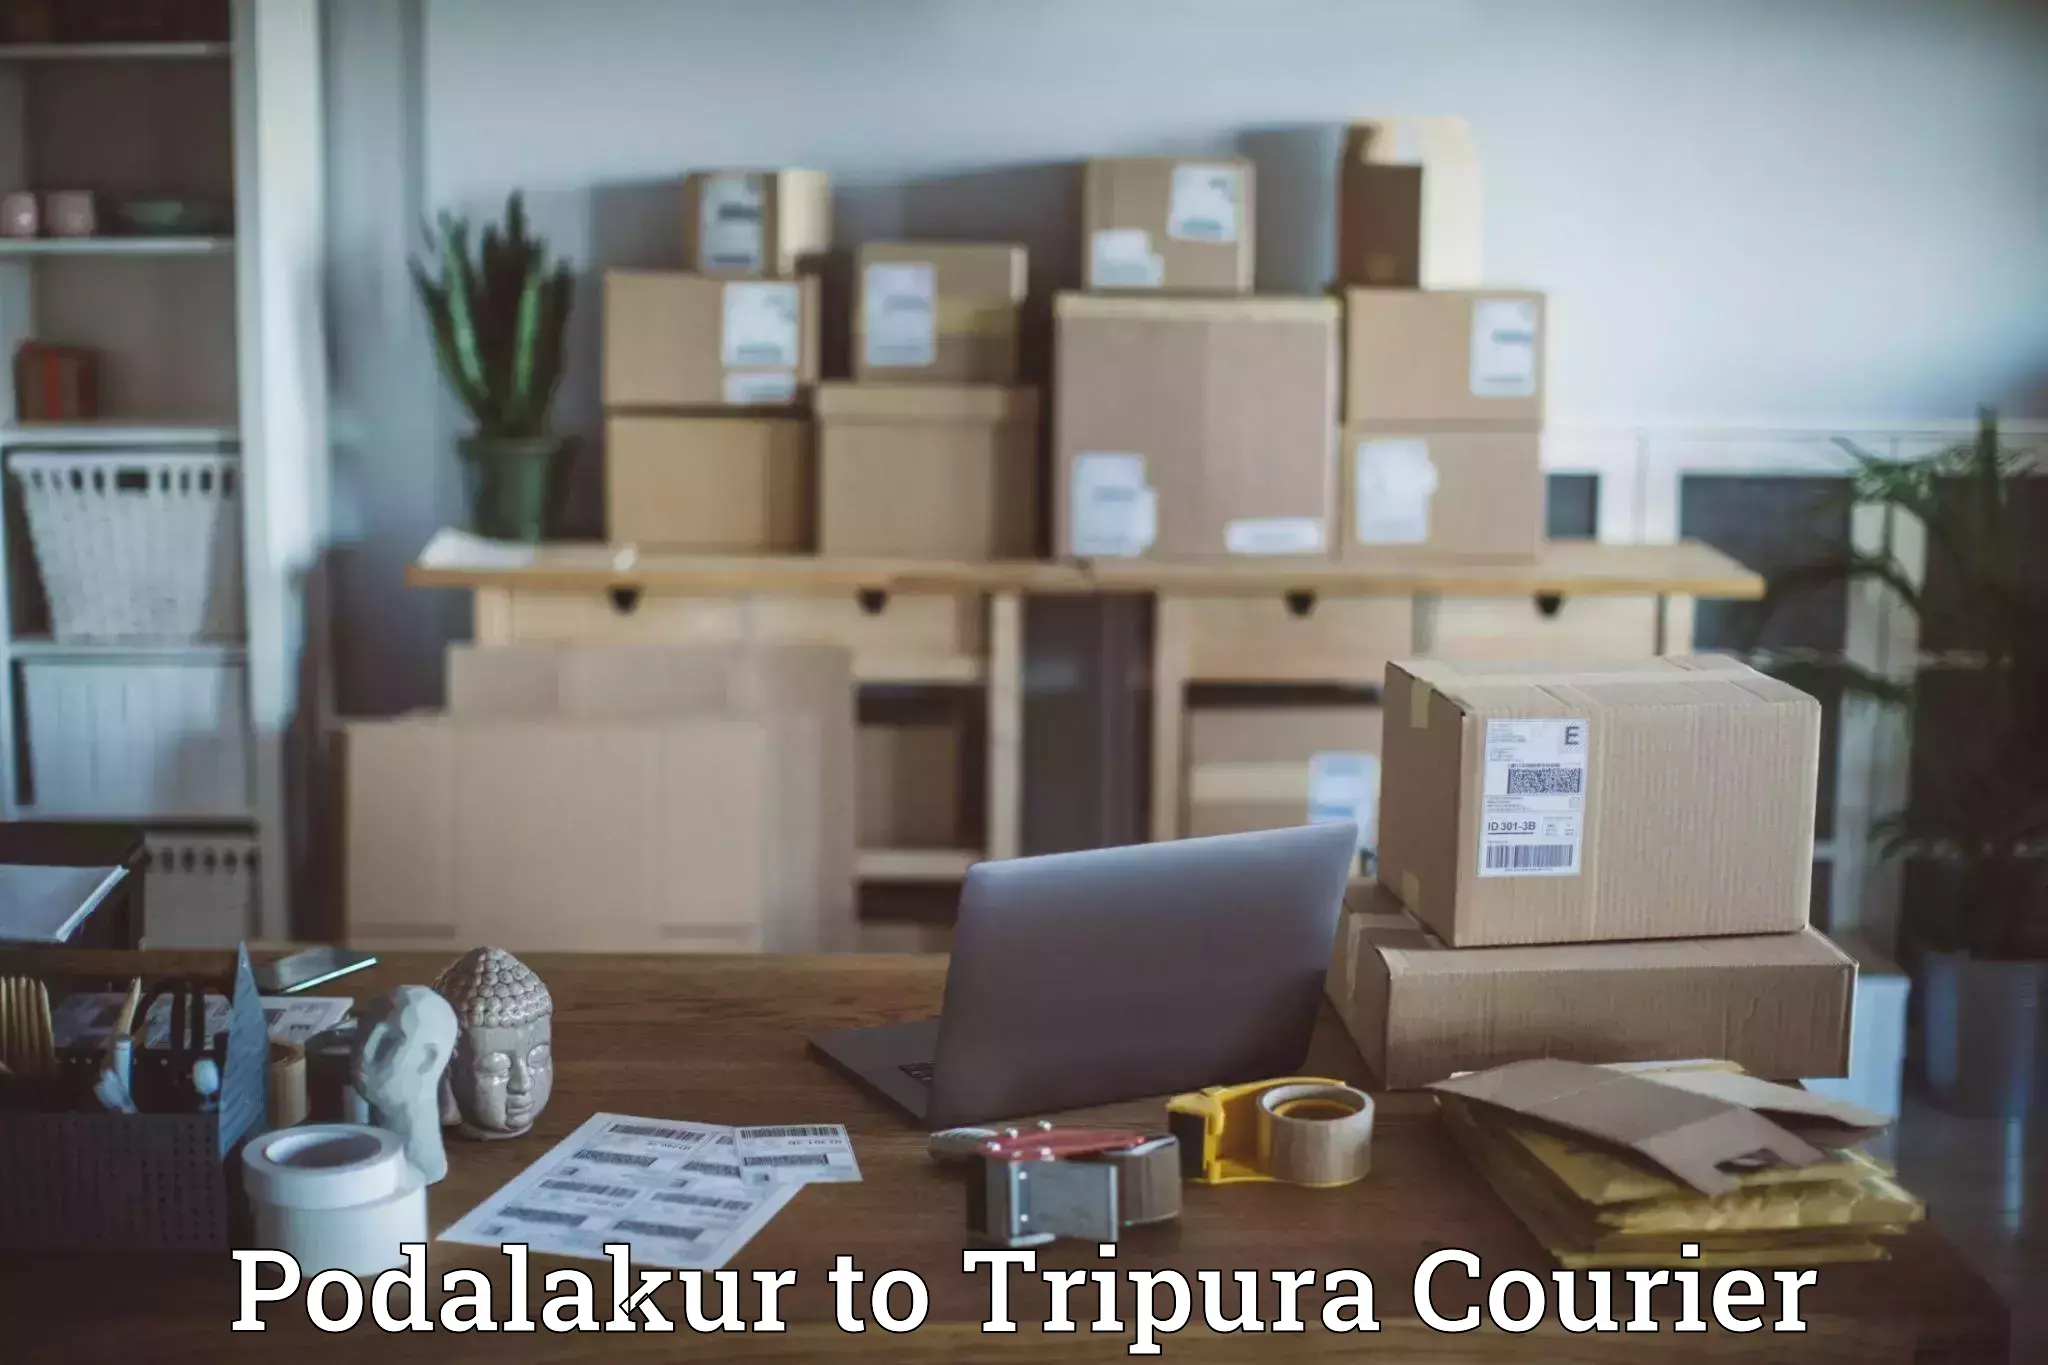 Personal parcel delivery in Podalakur to Udaipur Tripura